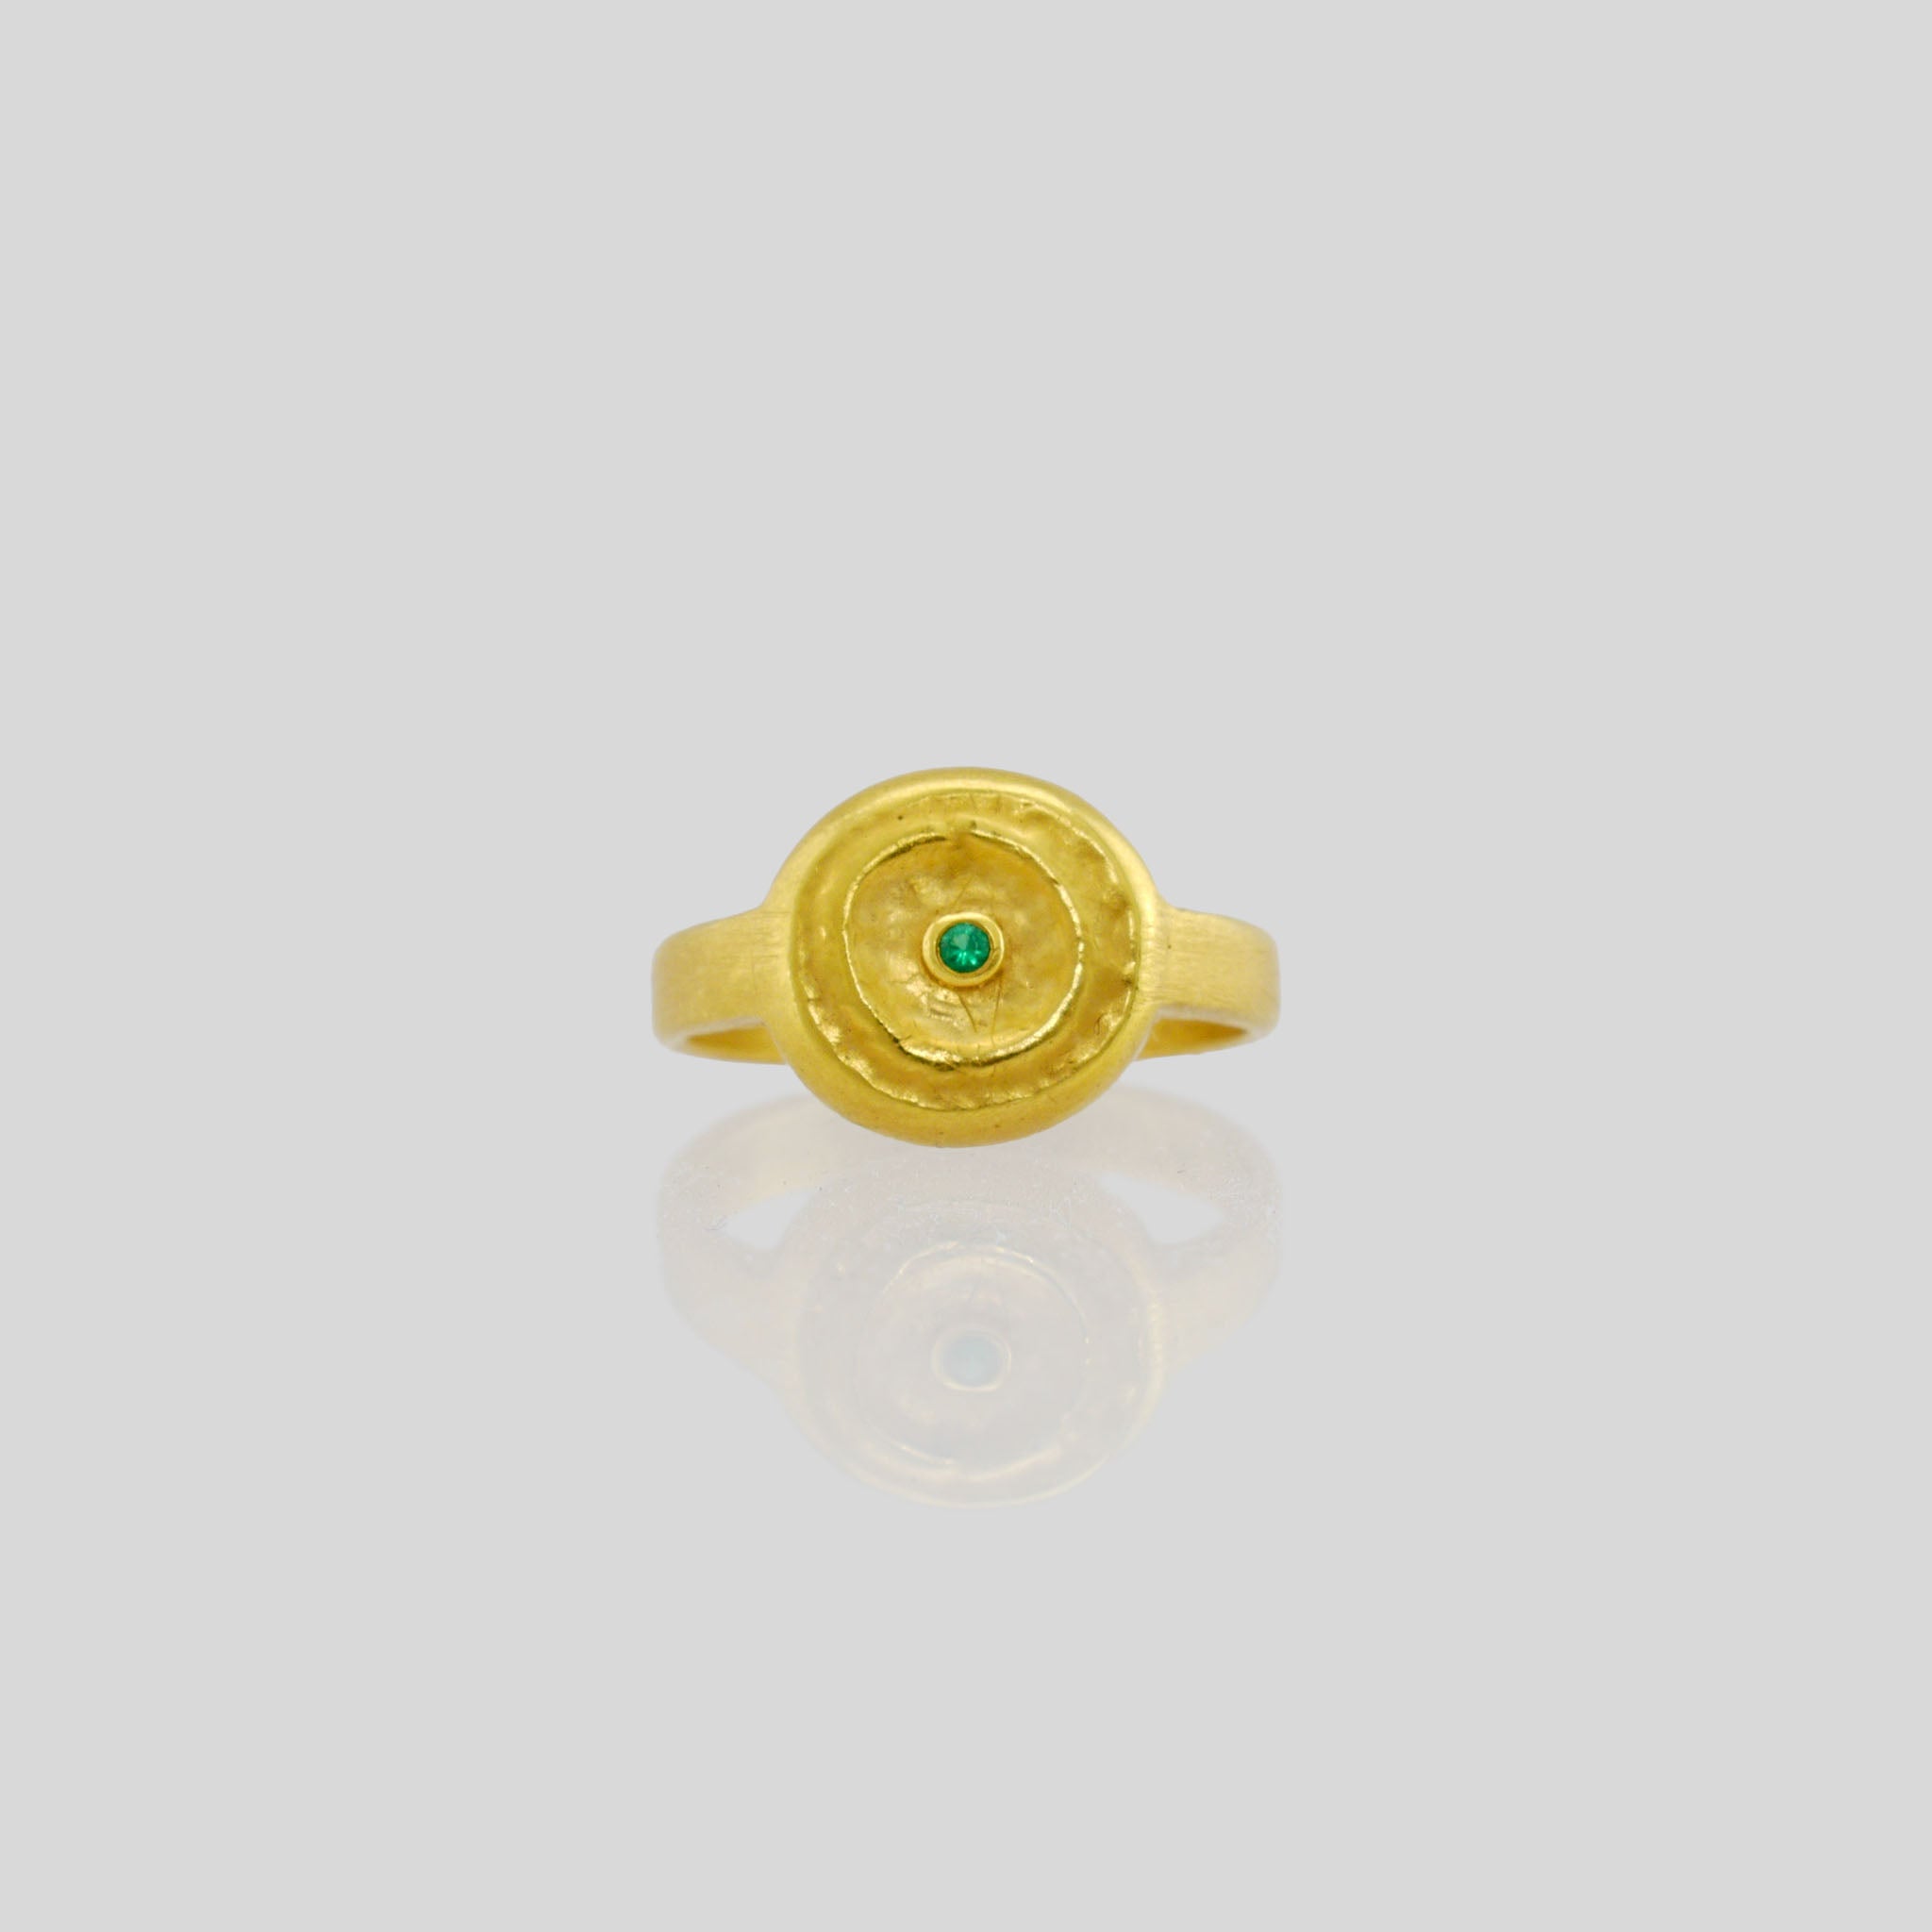 Front view of Handmade 18k Gold ring with a central Emerald, exuding vintage charm reminiscent of the Egyptian pharaohs' era.